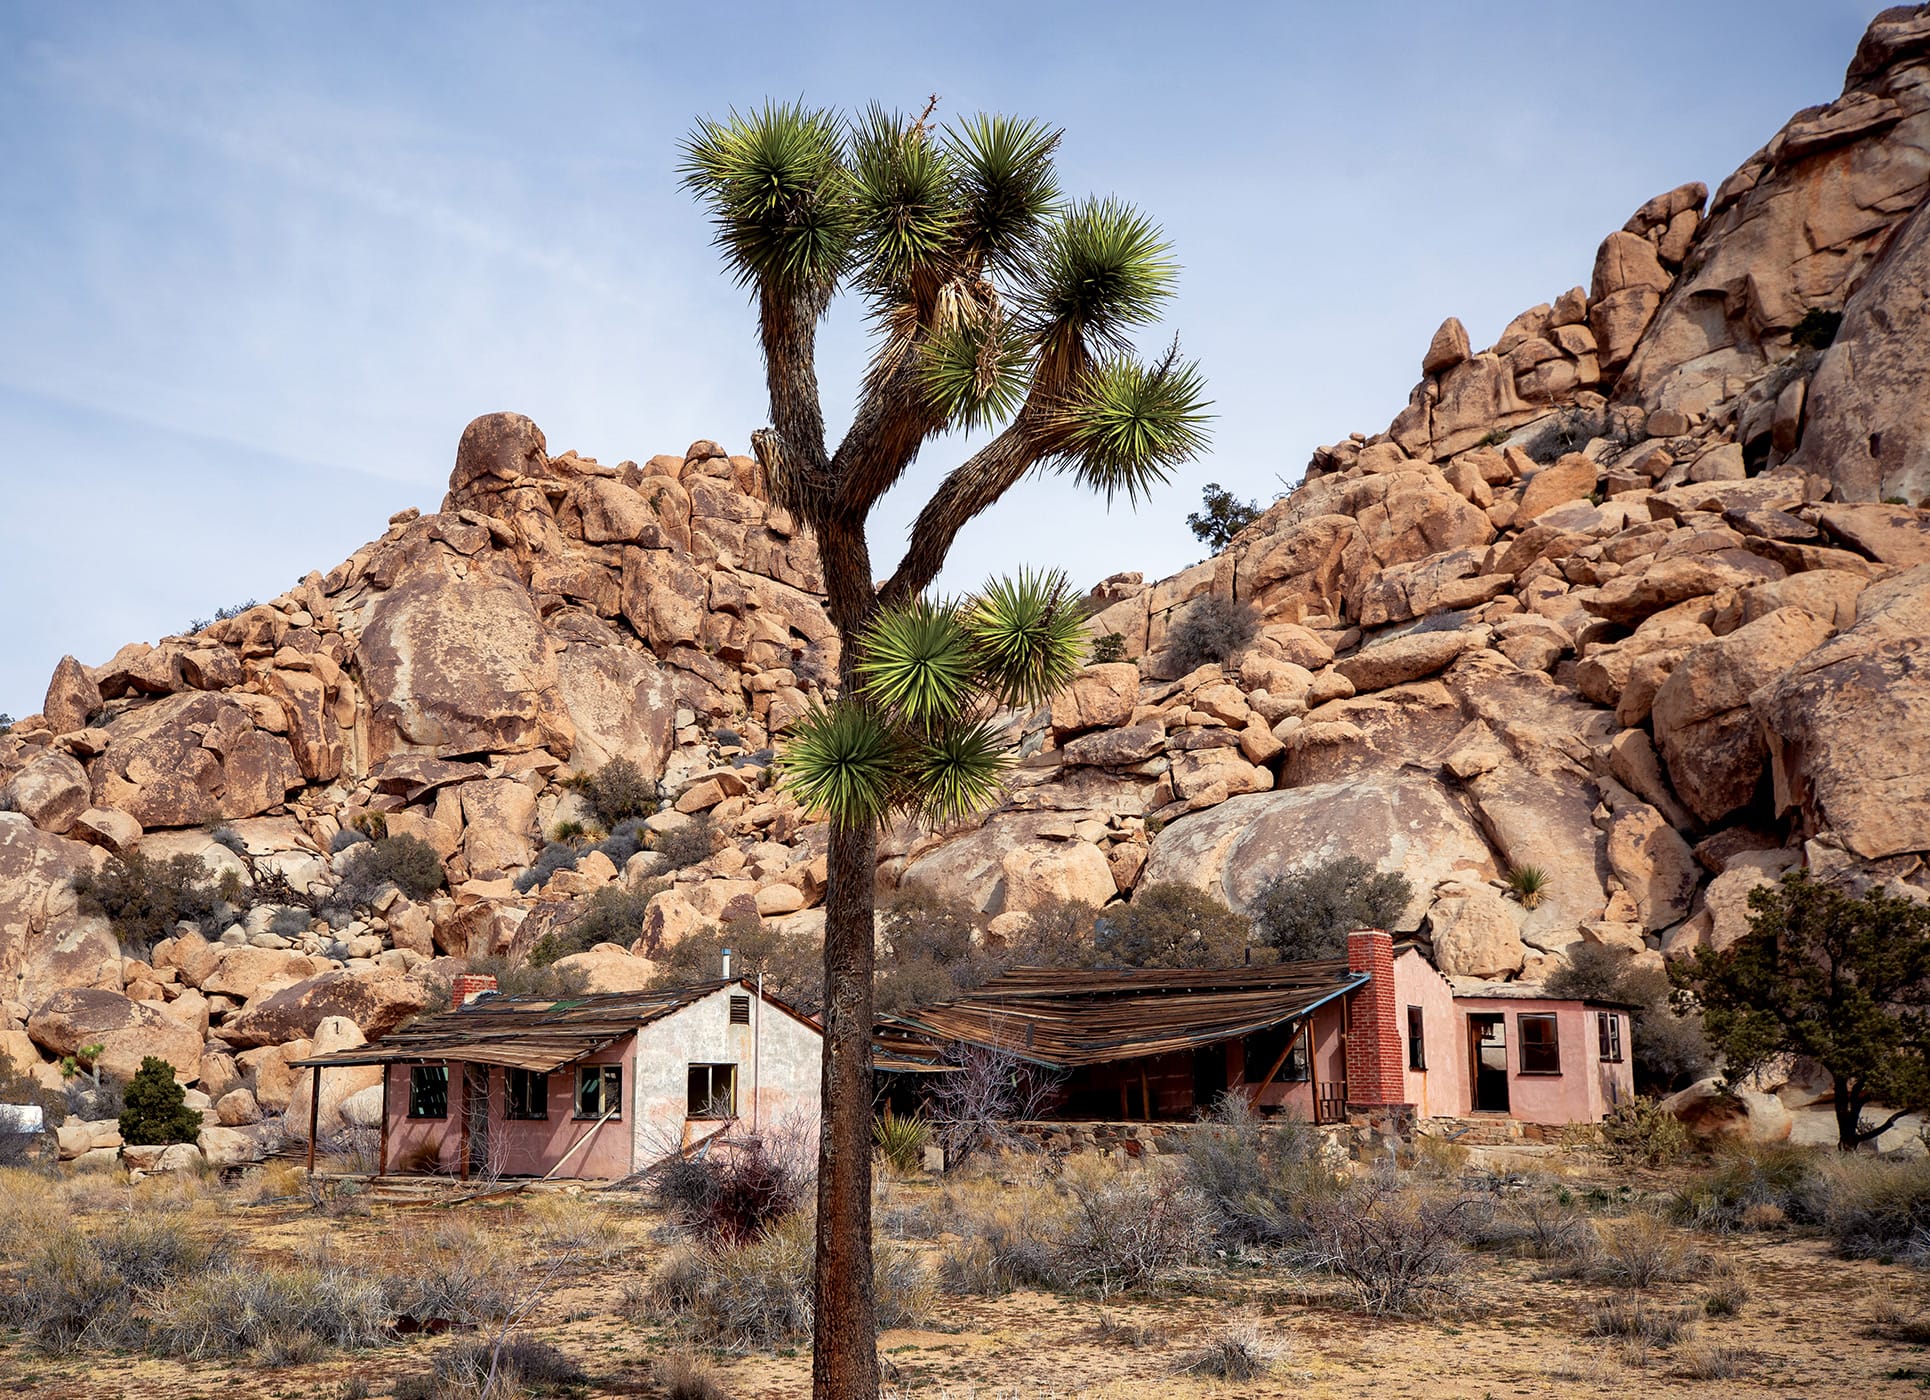 The Lost Horse Valley vacation property in Joshua Tree